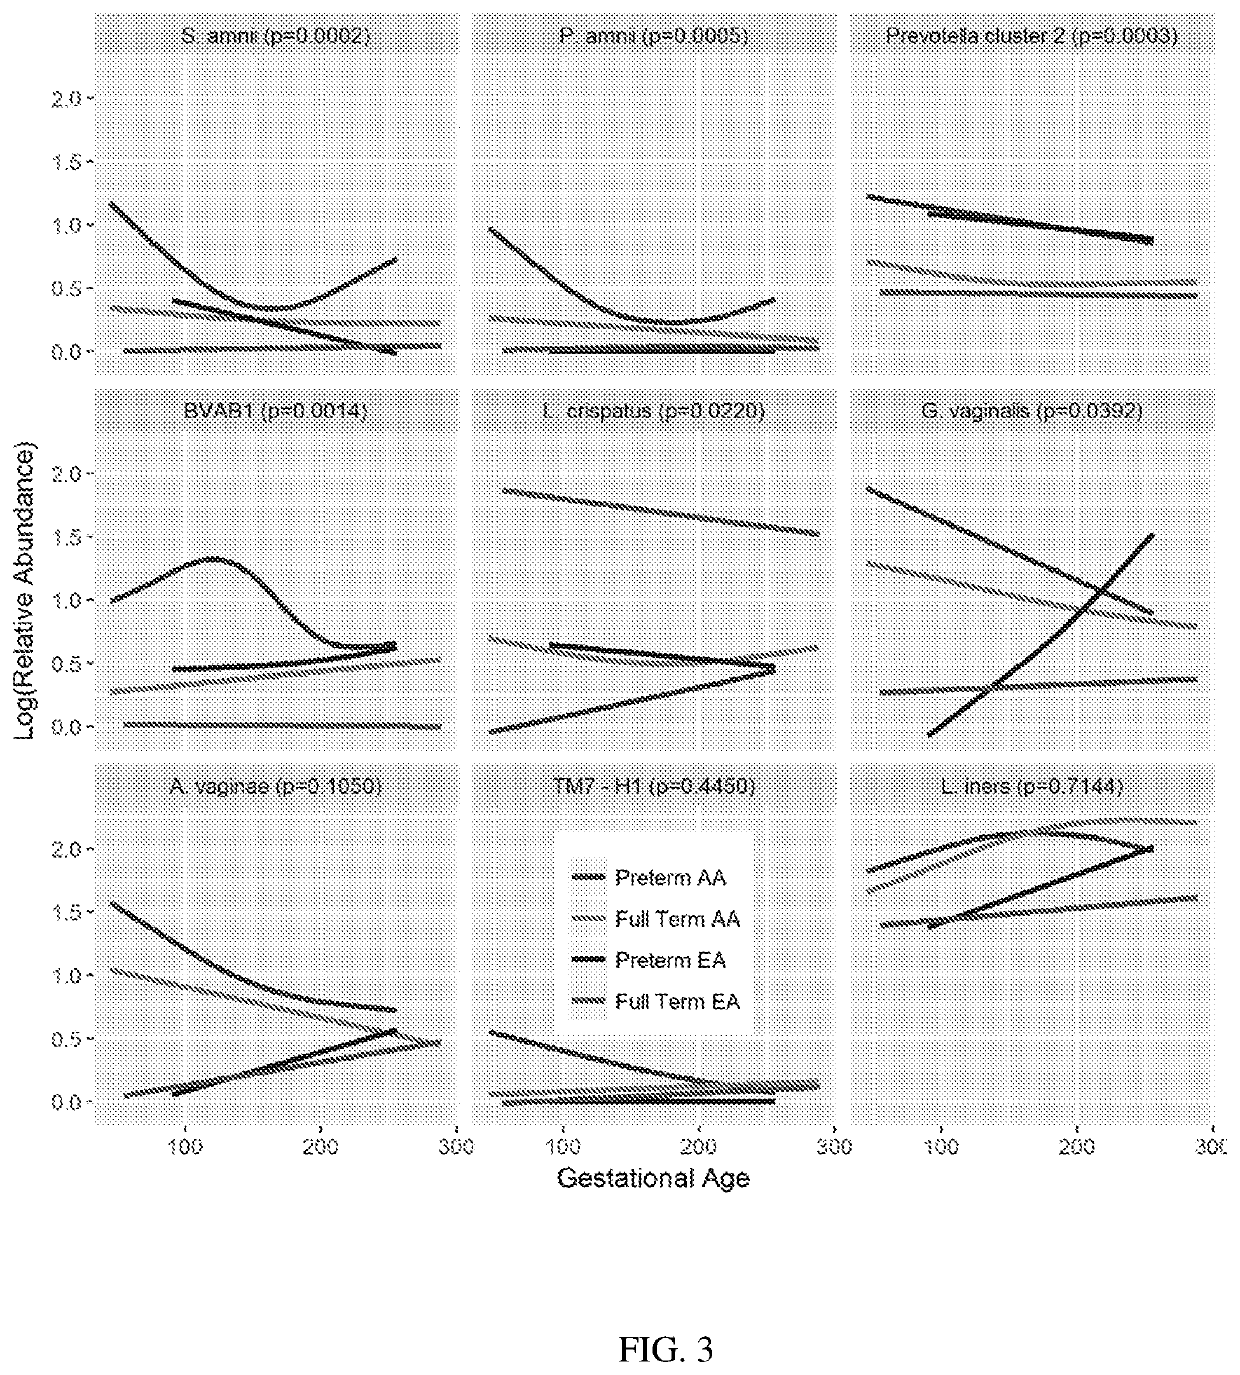 Vaginal microbiome markers for prediction of prevention of preterm birth and other adverse pregnancy outcomes